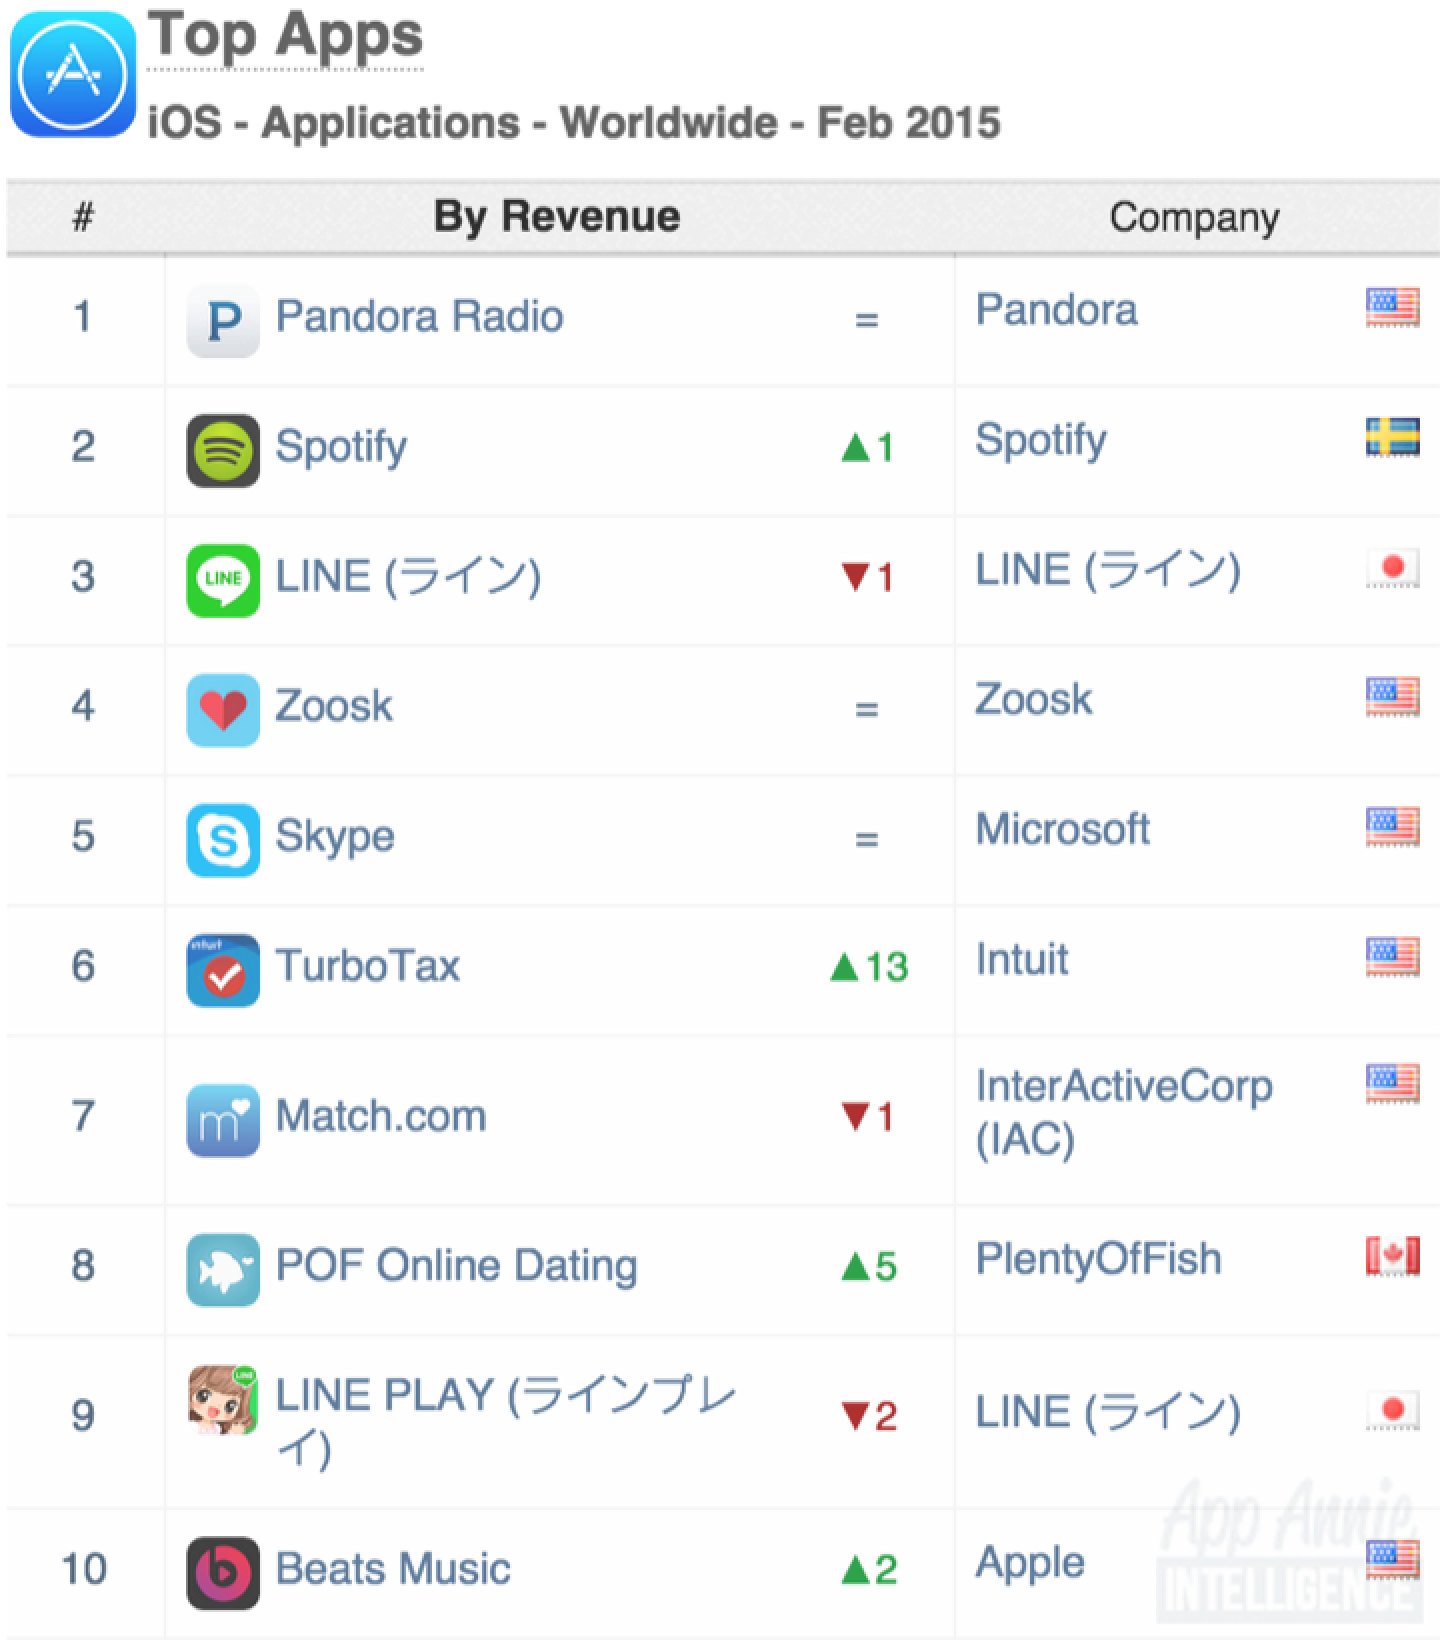 Top Apps iOS Apps Worldwide February 2015